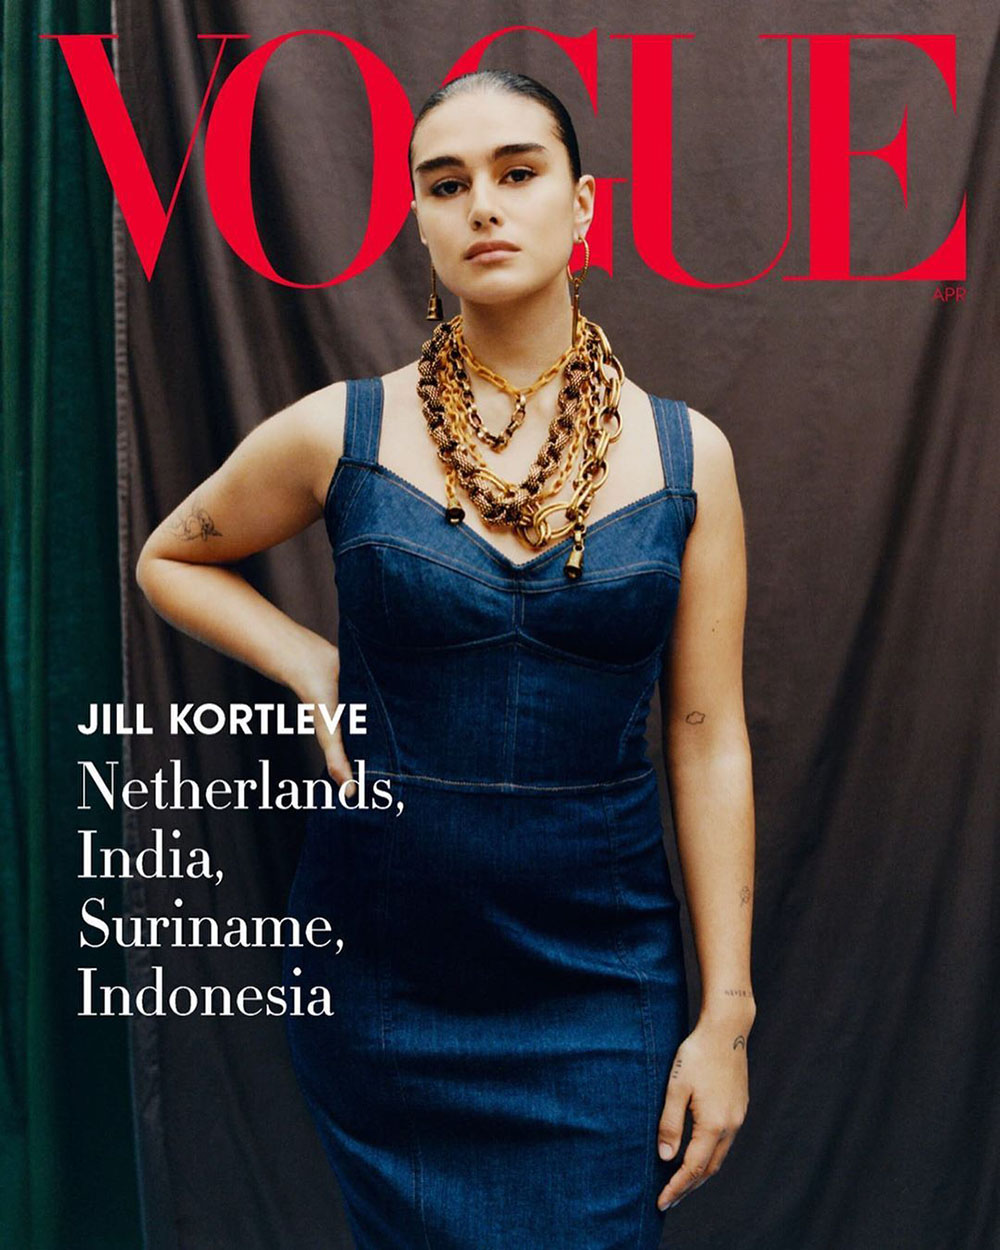 Models from around the world cover Vogue US April 2020 by Tyler Mitchell